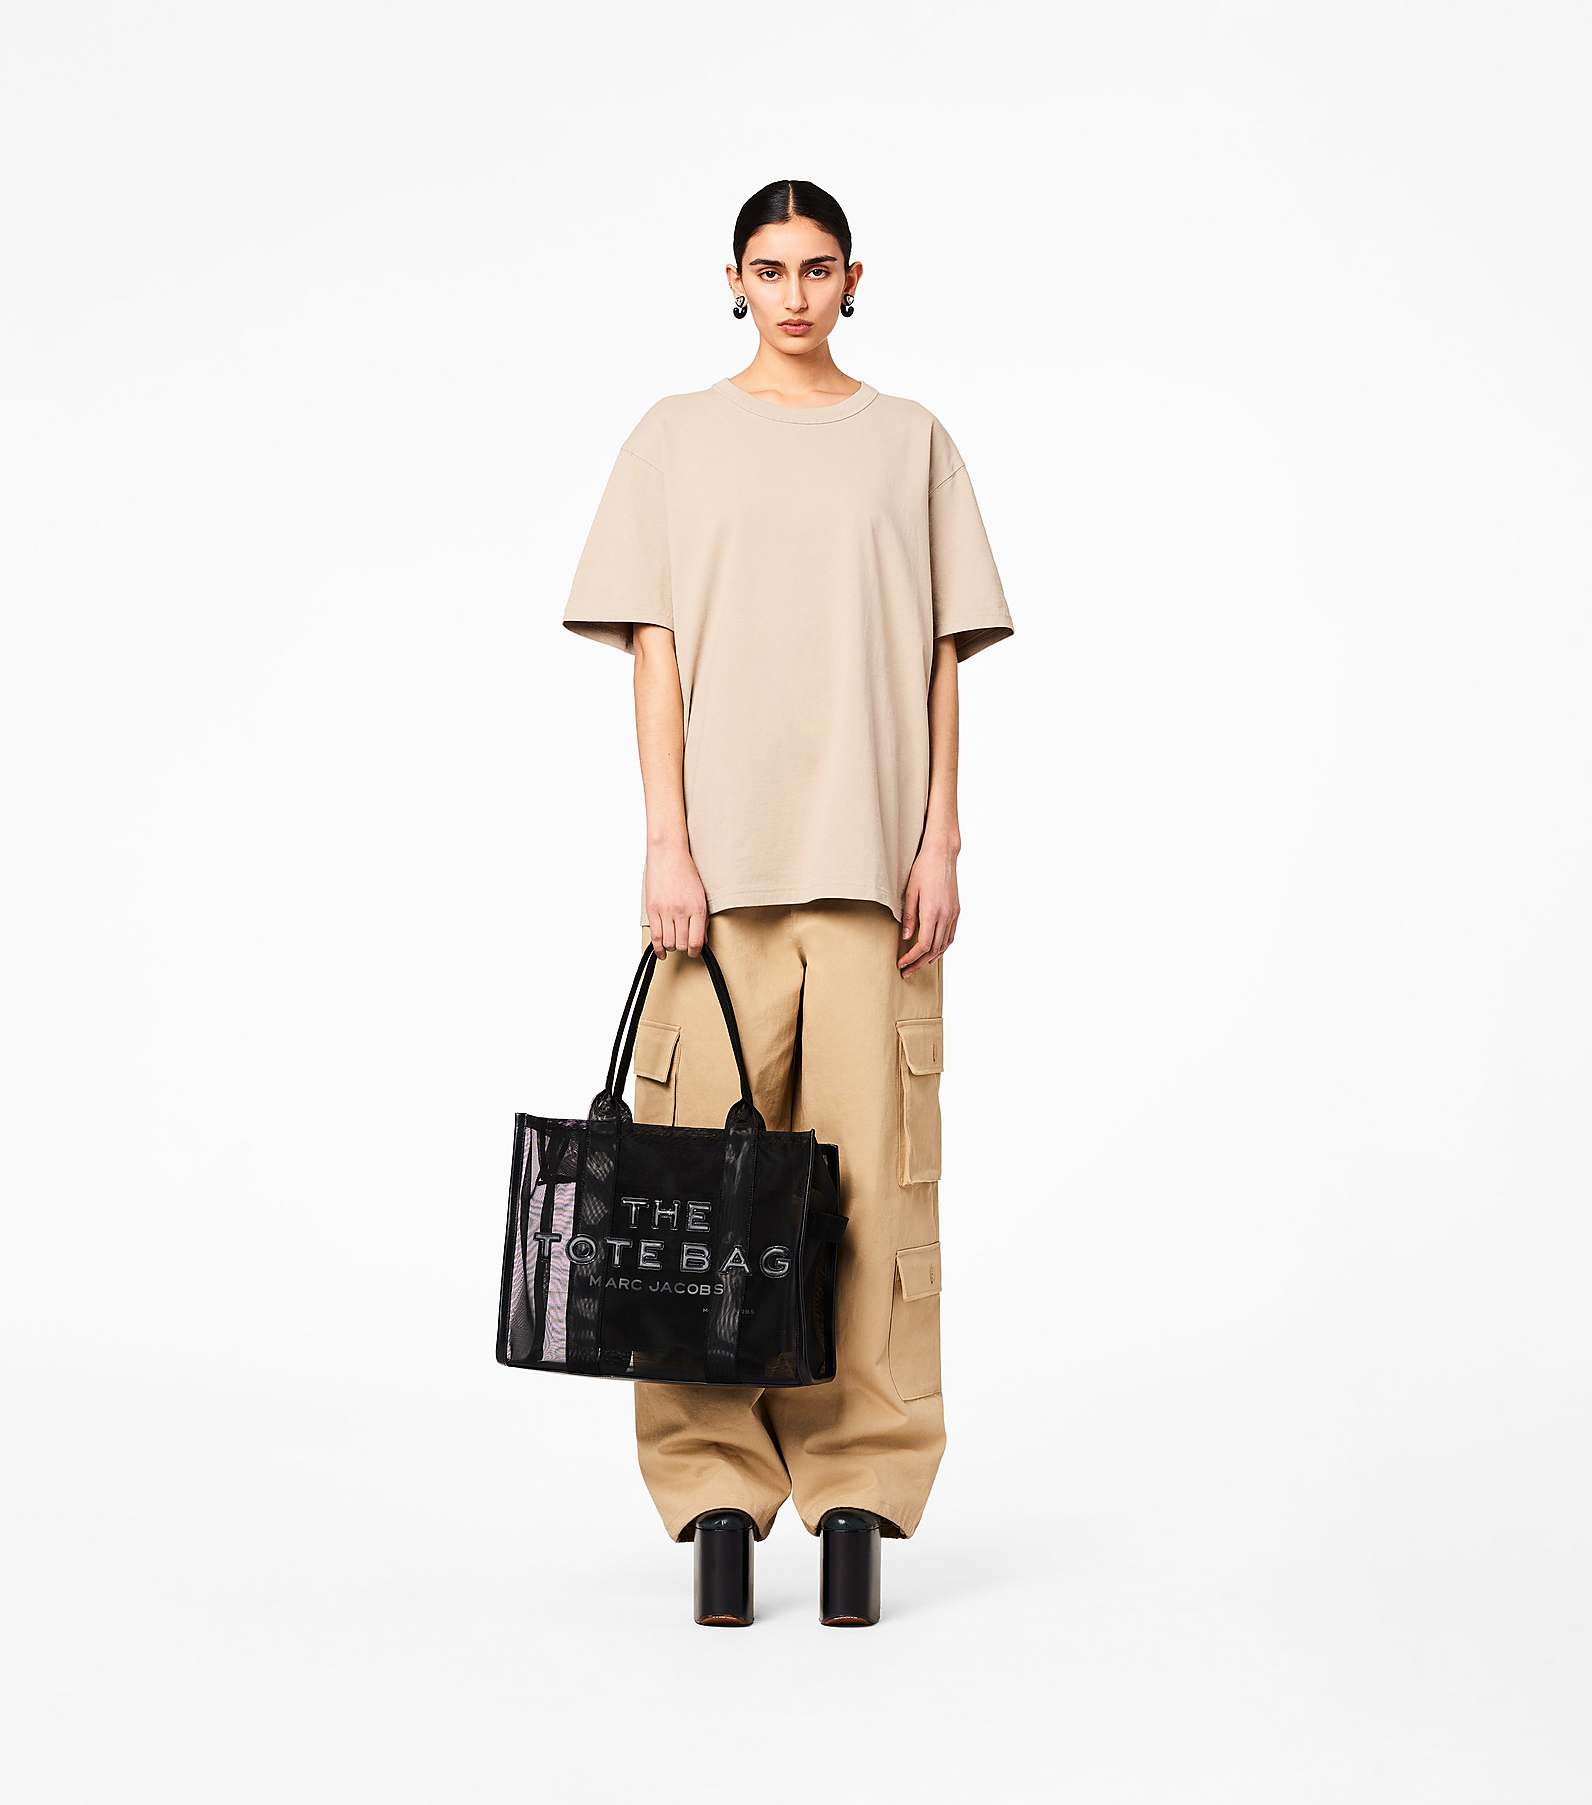 The Mesh Large Tote | Marc Jacobs | Official Site